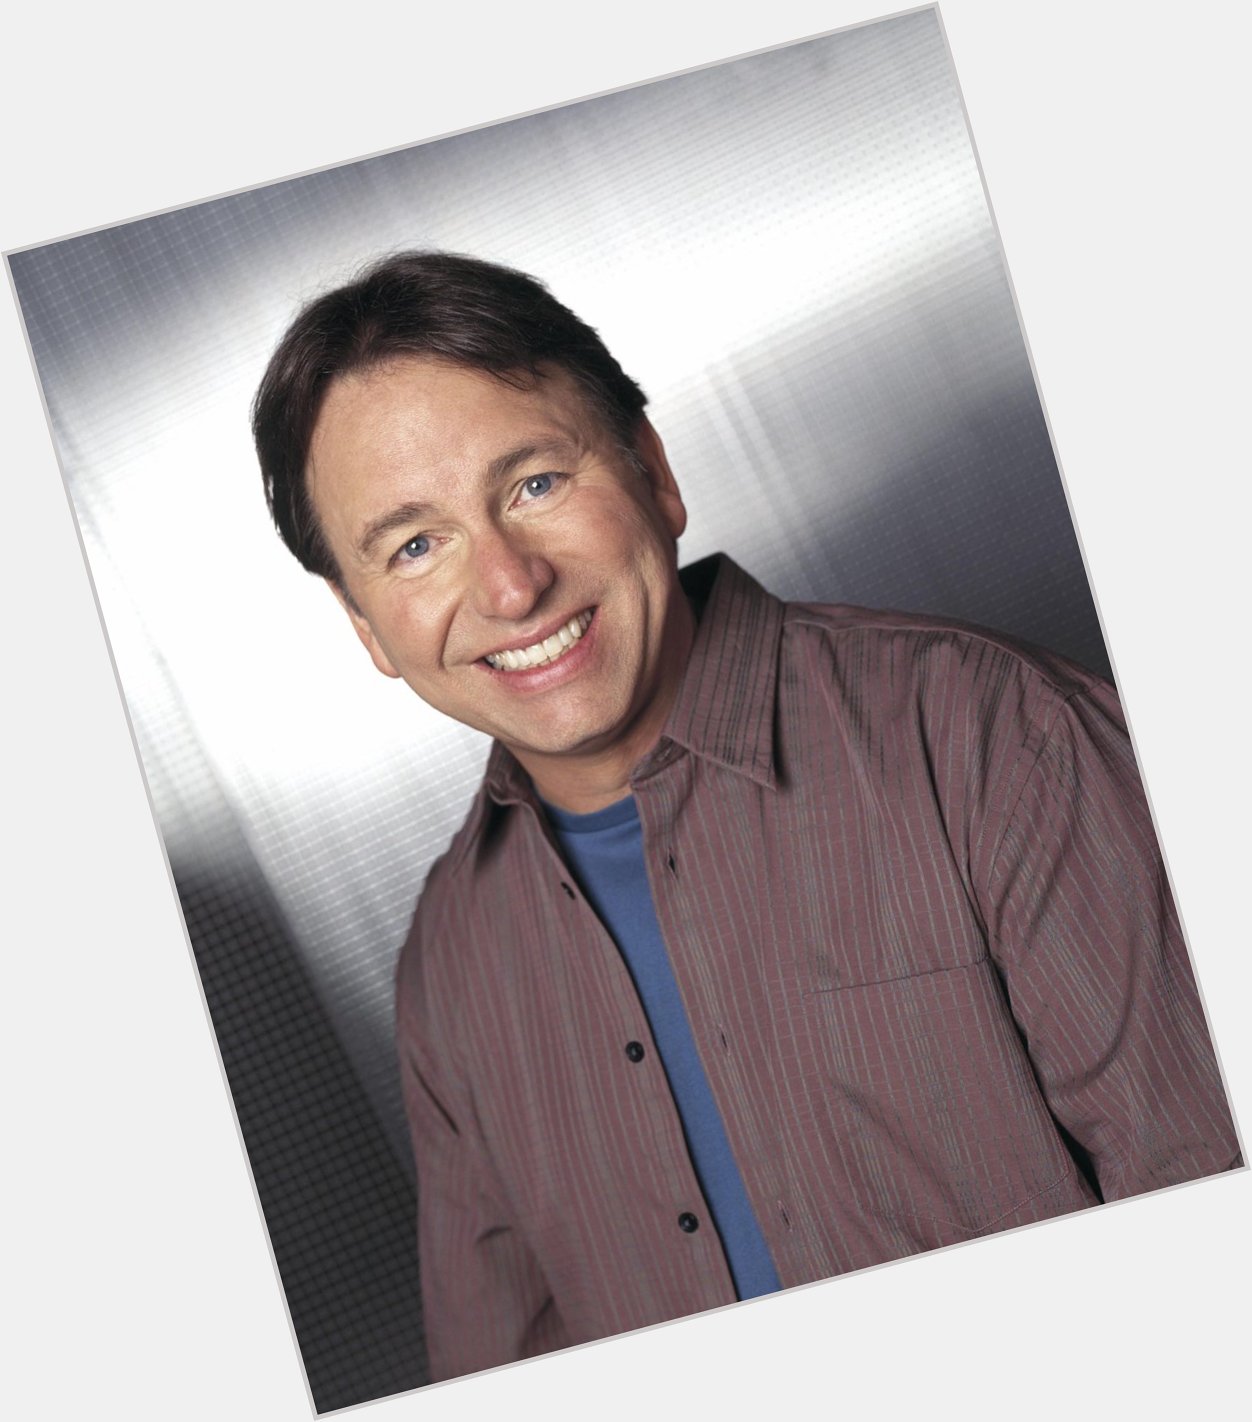  on with wishes John Ritter a happy birthday! 